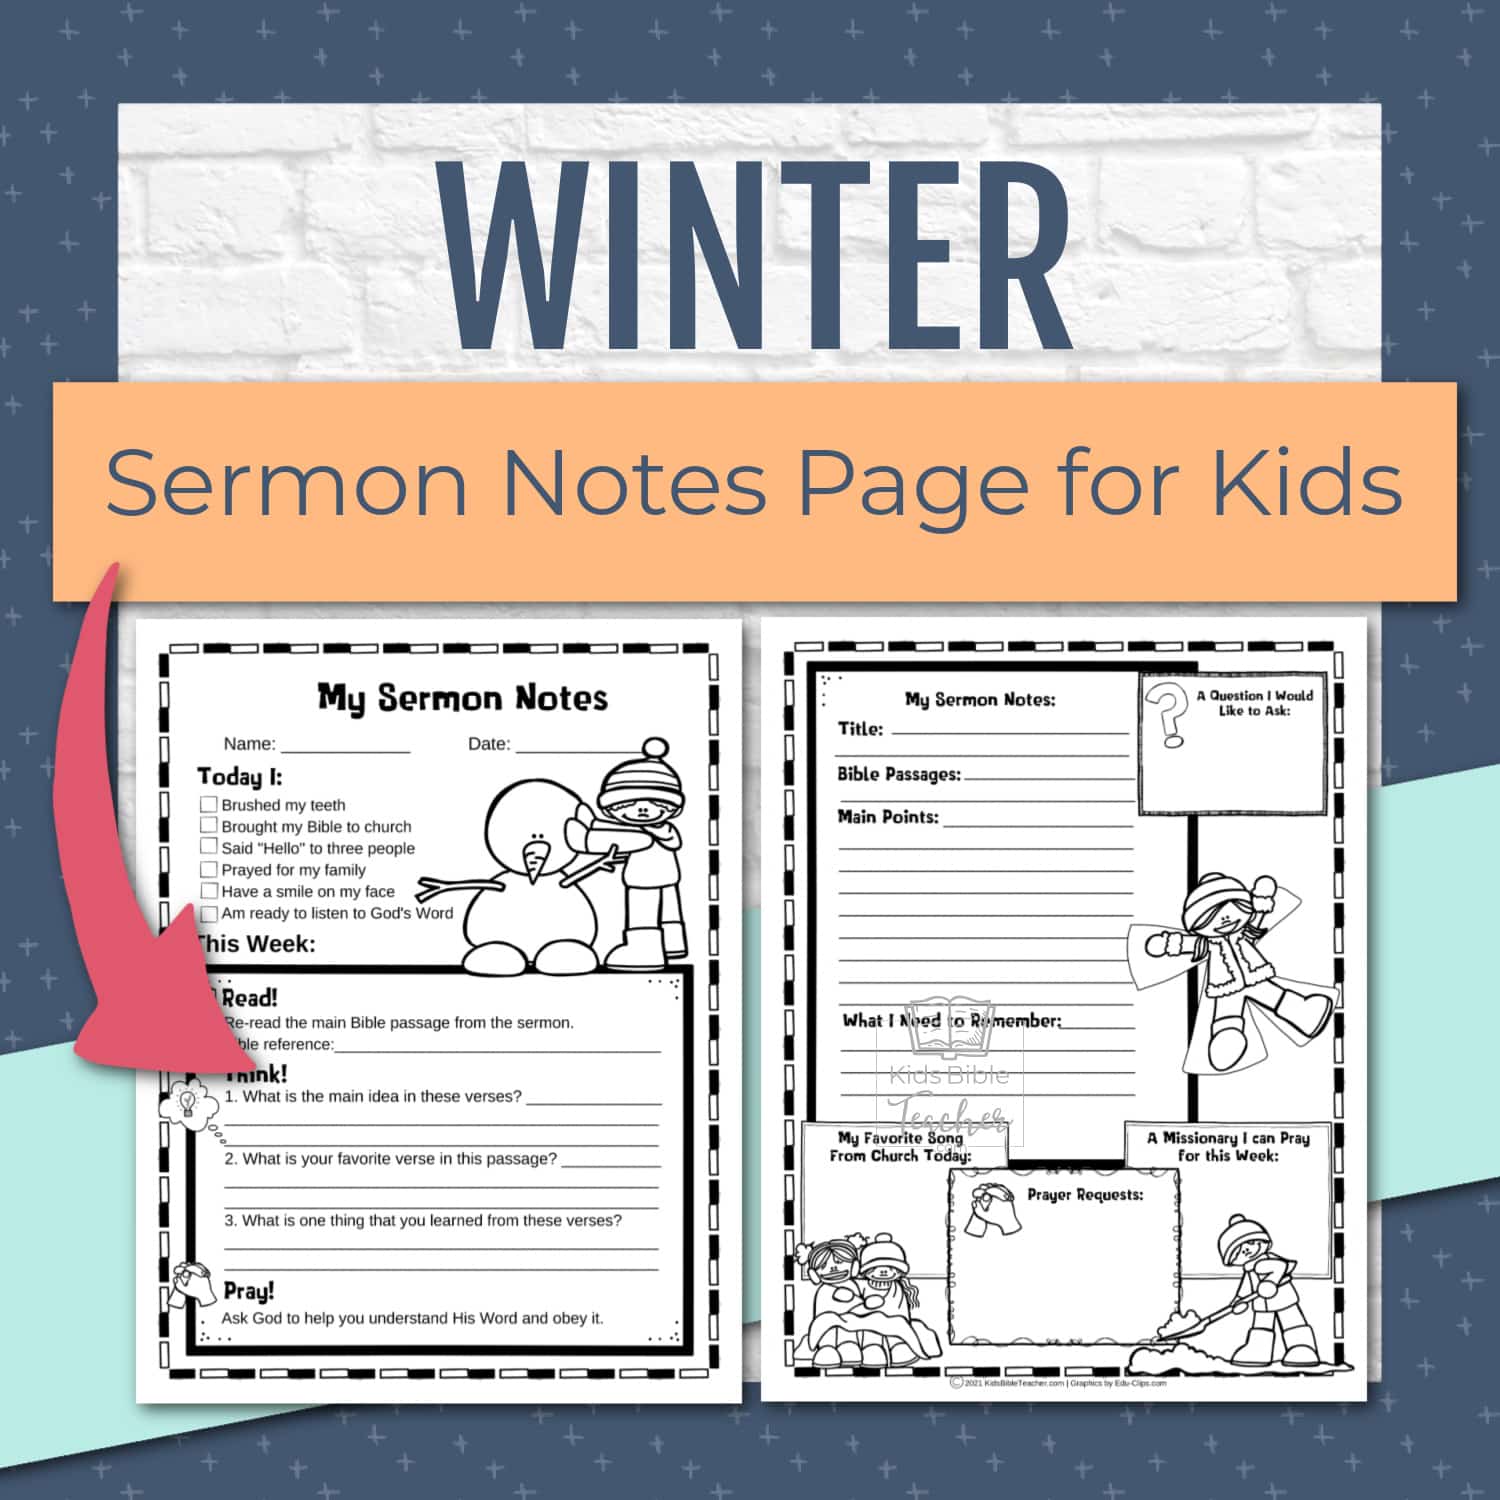 Winter Sermon Notes Page showing both sides of page